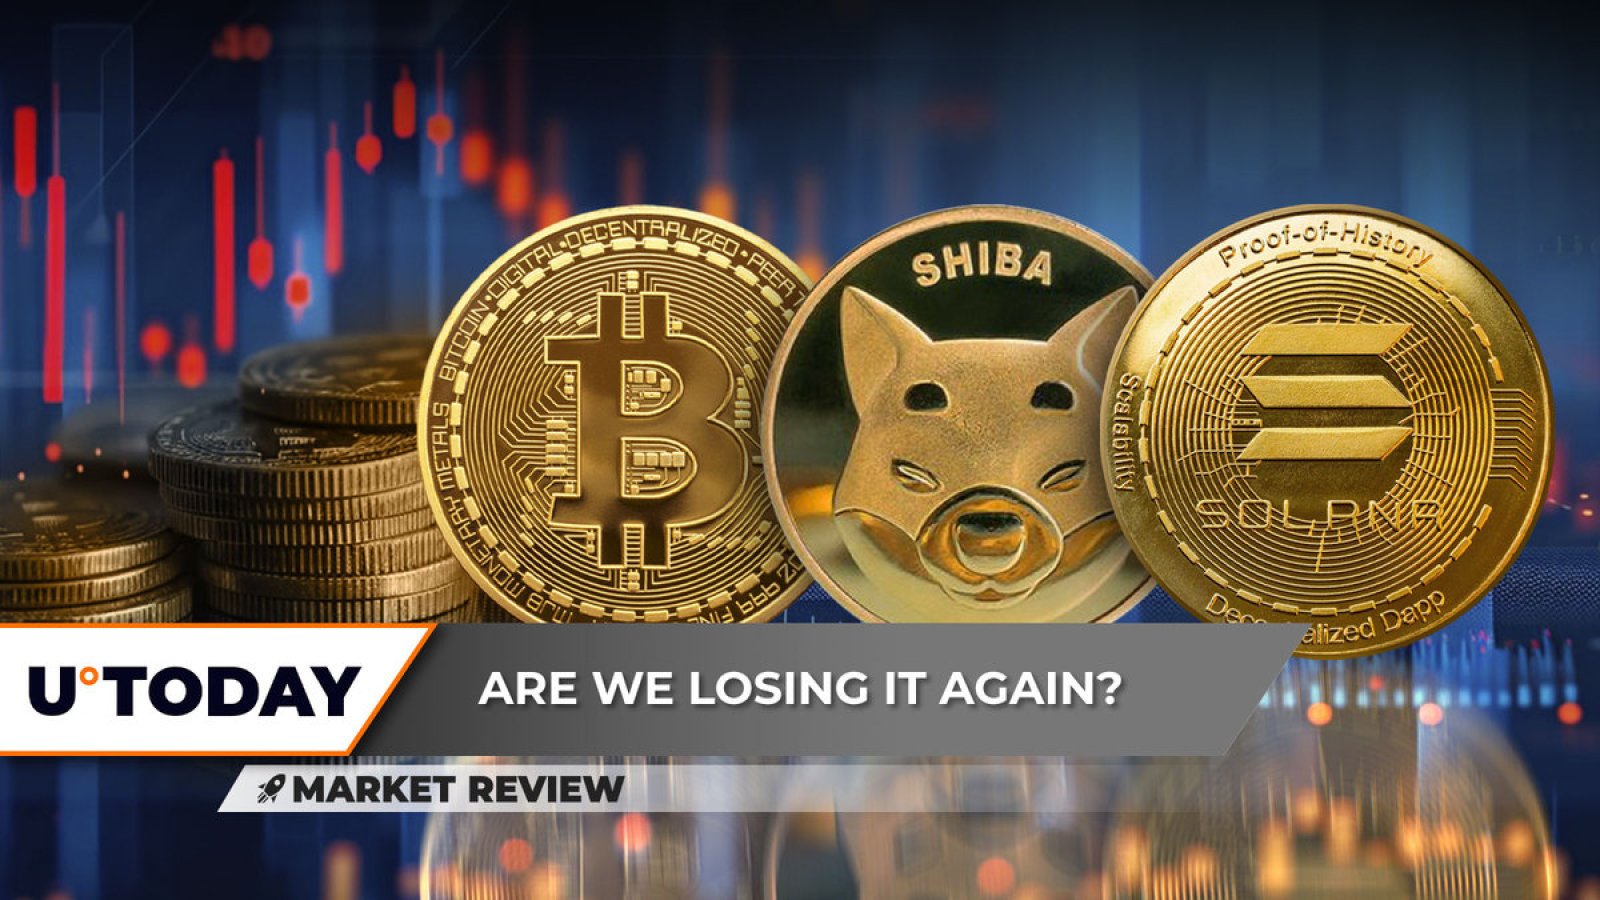 Bitcoin (BTC) About to Lose $60,000, Is Shiba Inu (SHIB) Ready for It?  Solana (SOL) forms a reversal pattern